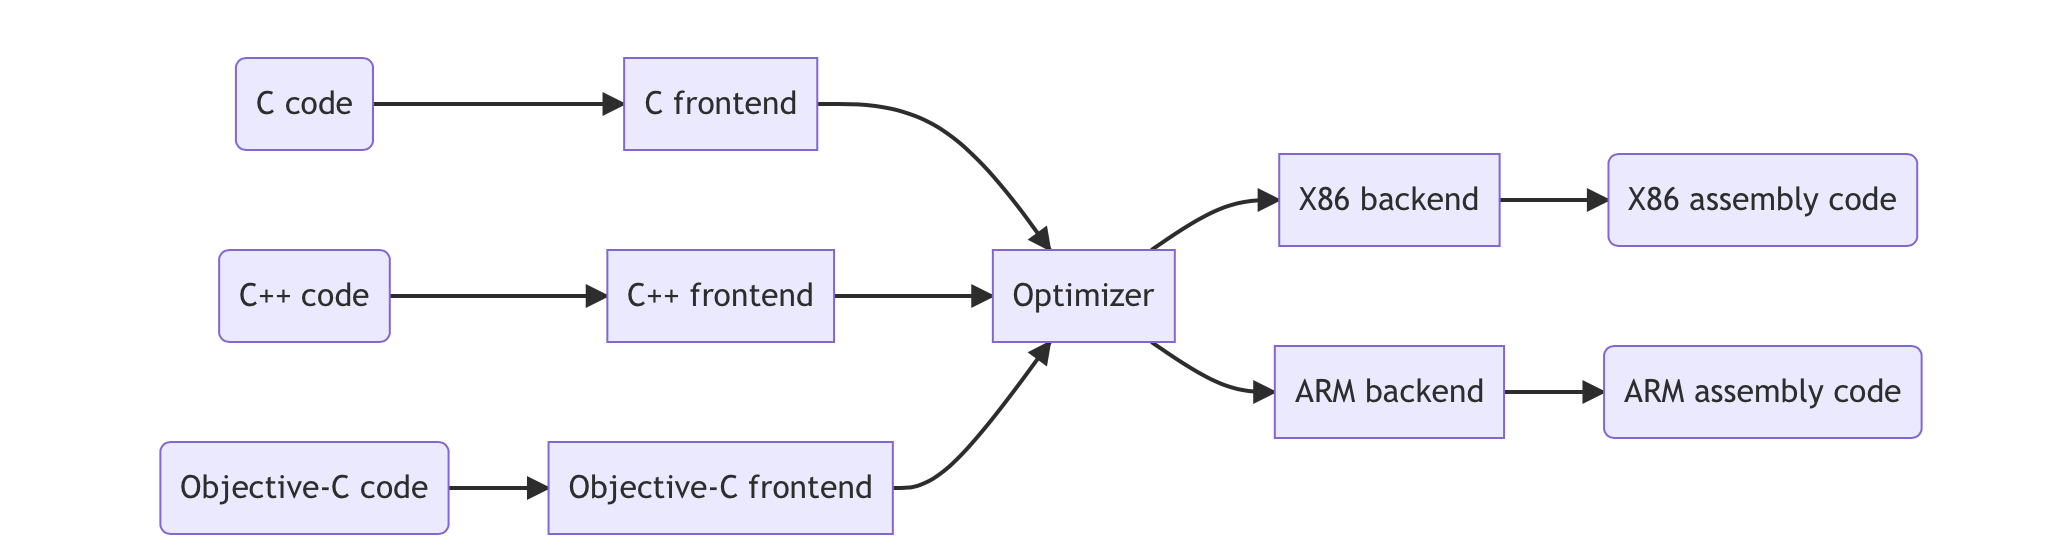 internal workflow of the compiler